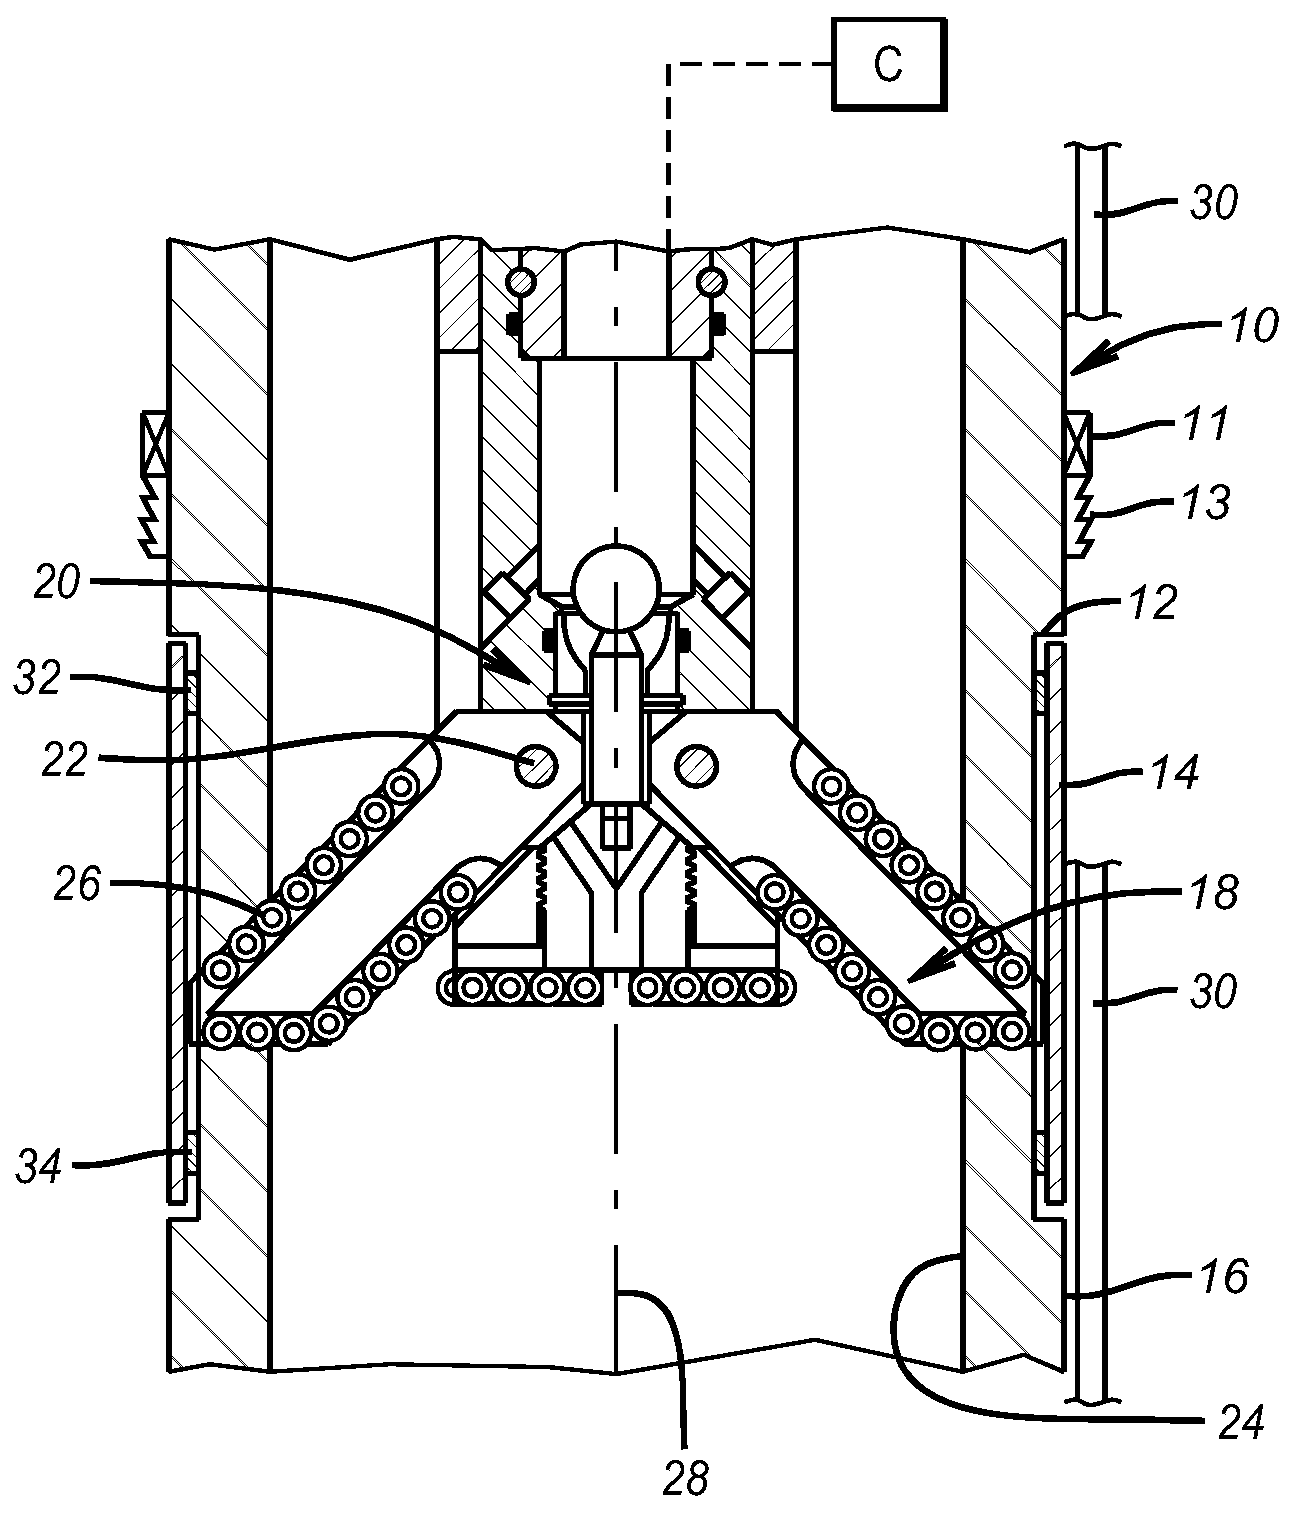 Subterranean Tubular Cutter with Depth of Cut Feature